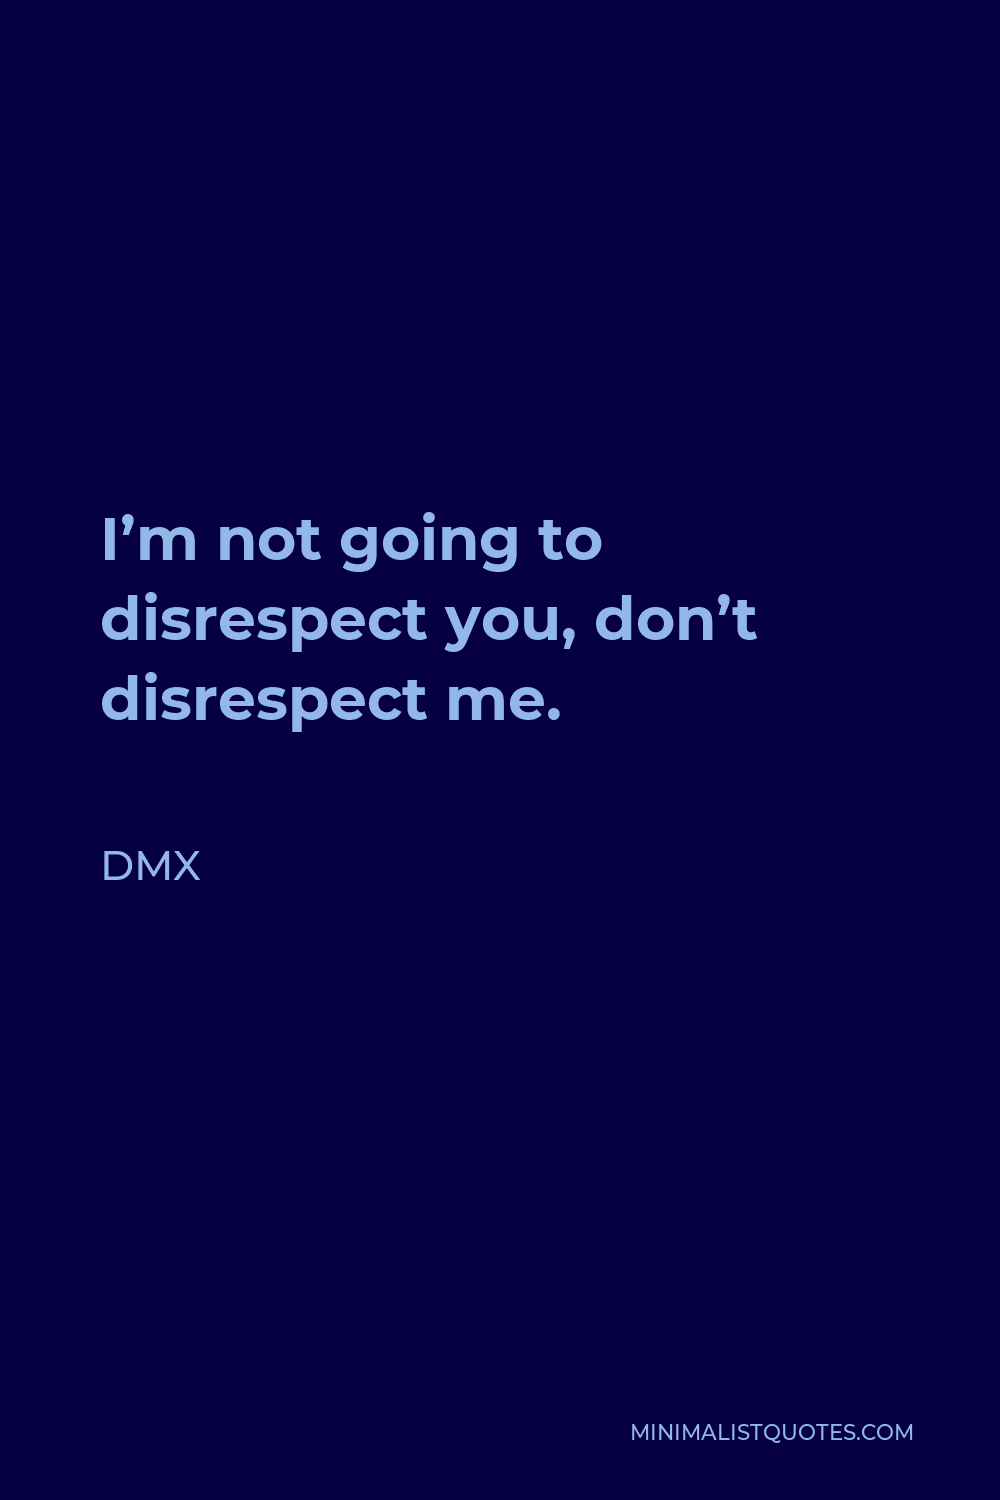 DMX Quote - I’m not going to disrespect you, don’t disrespect me.